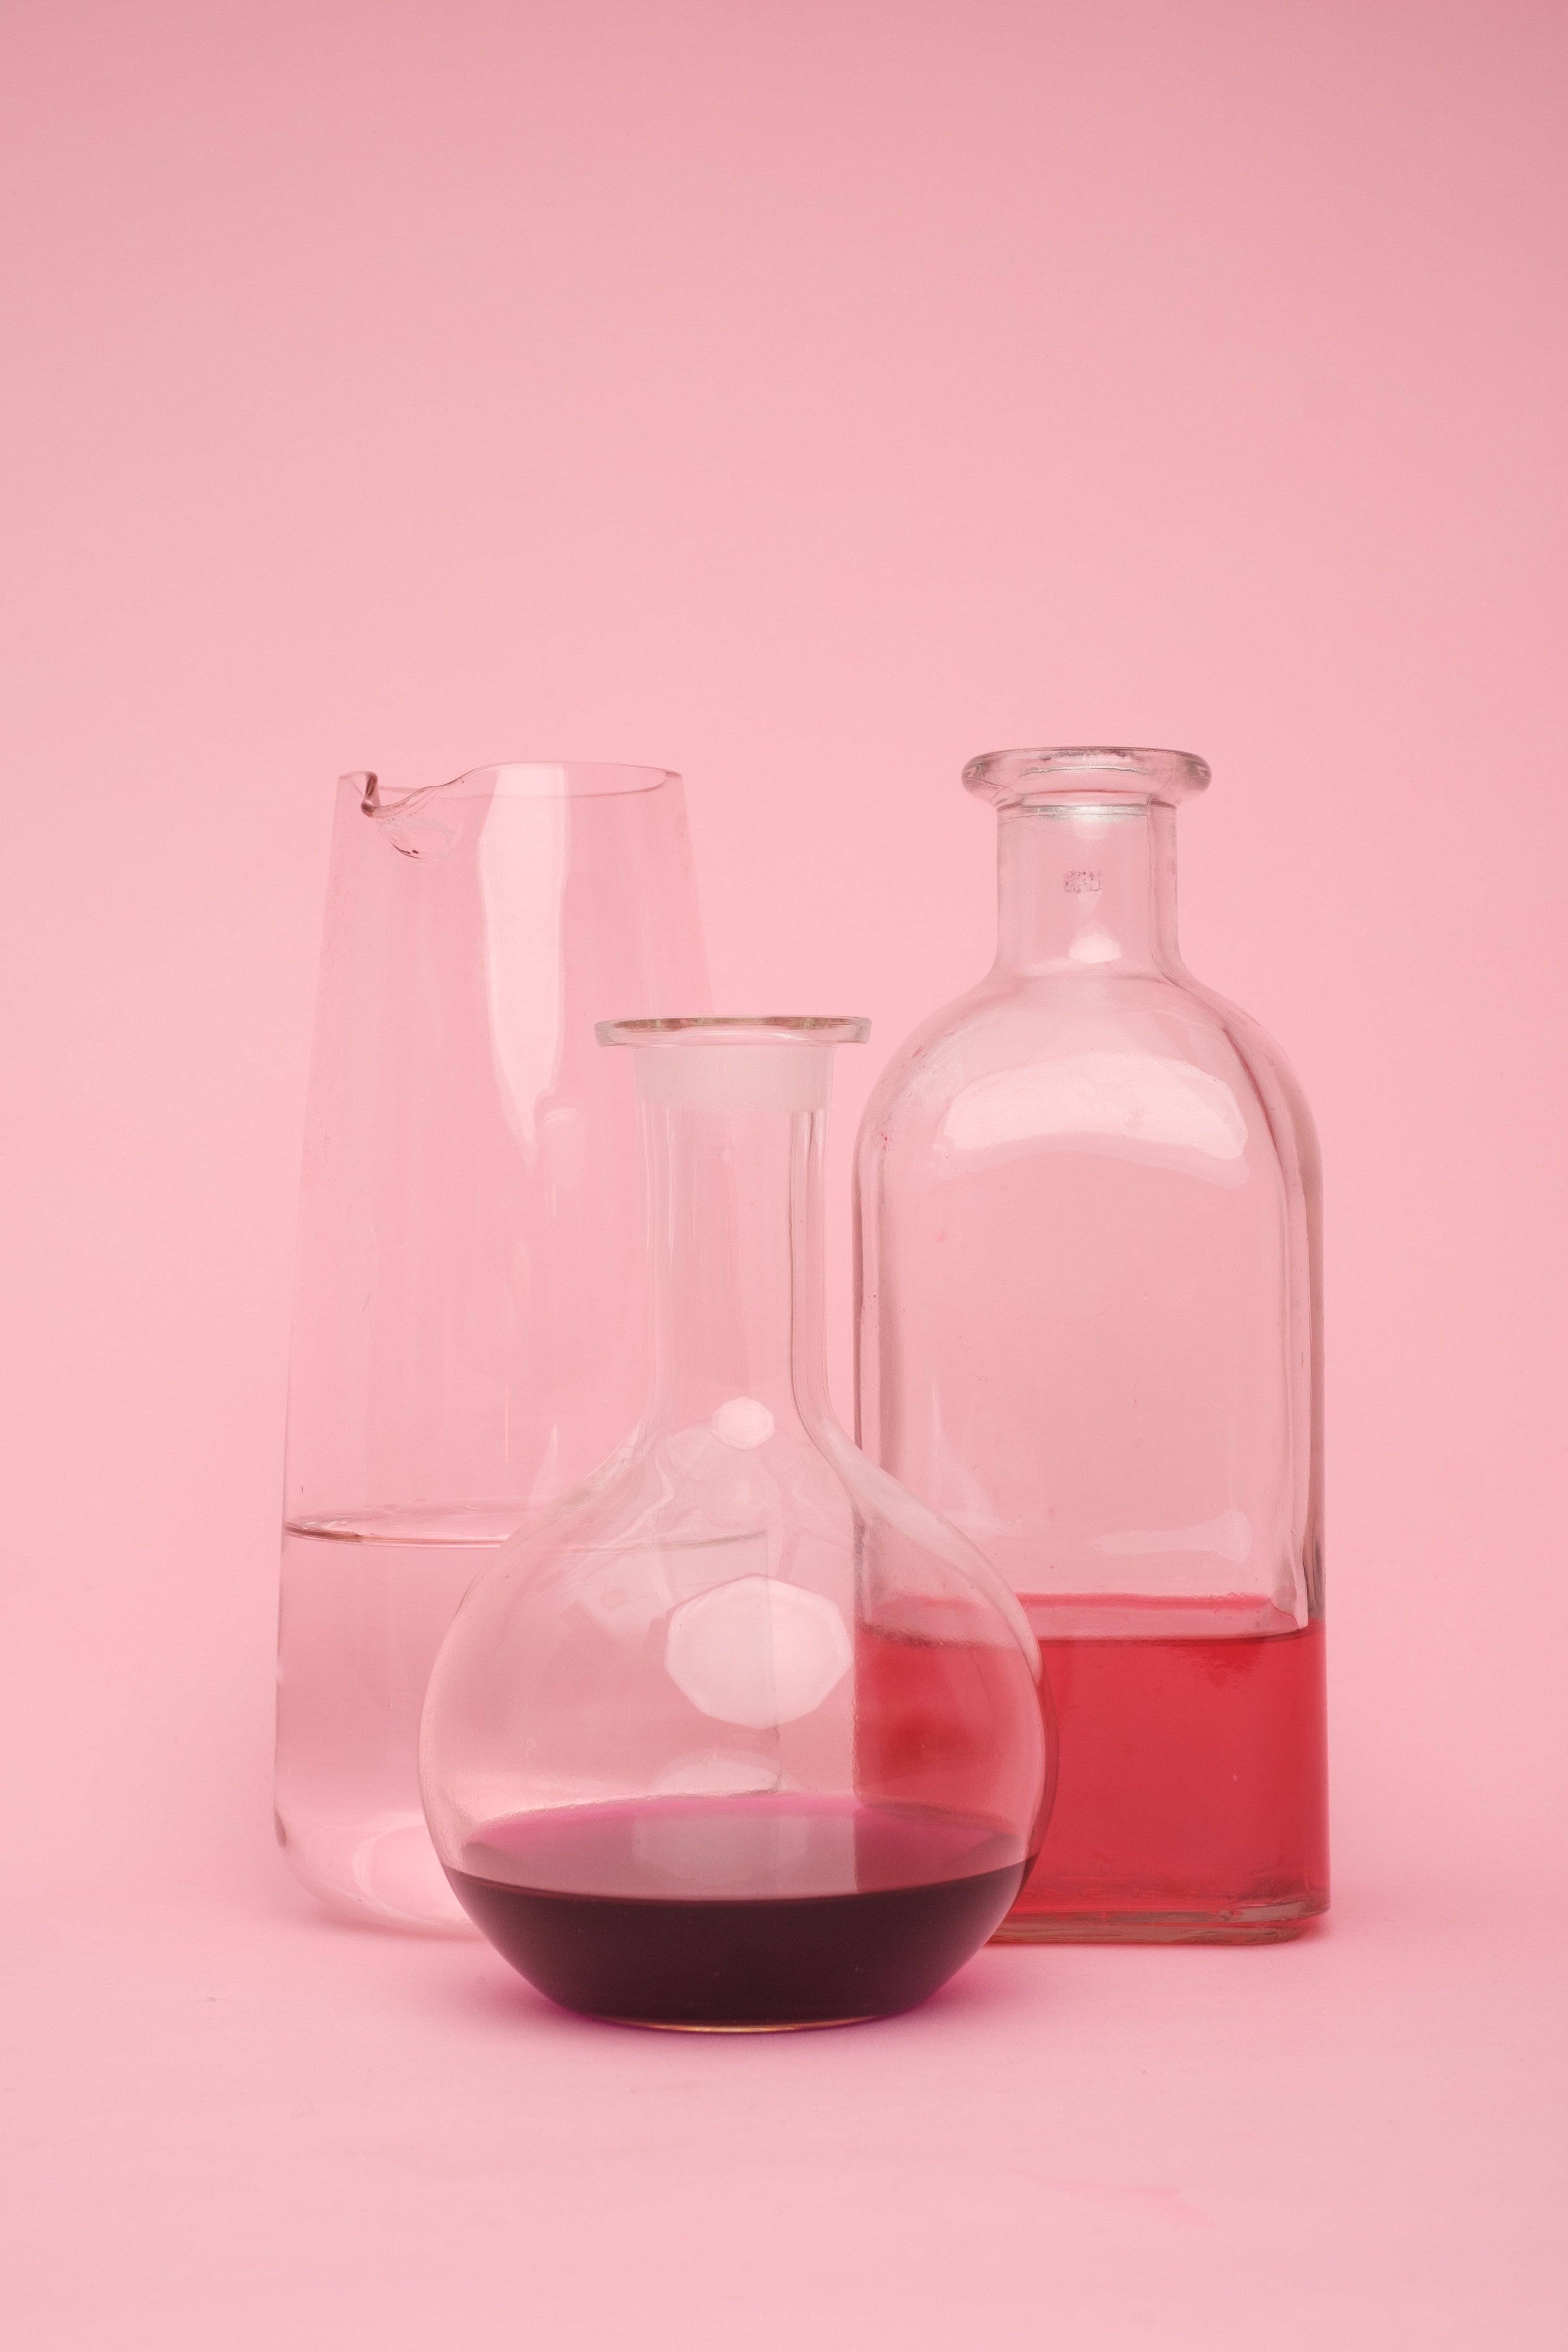 A couple of glasses and bottles on pink - Chemistry